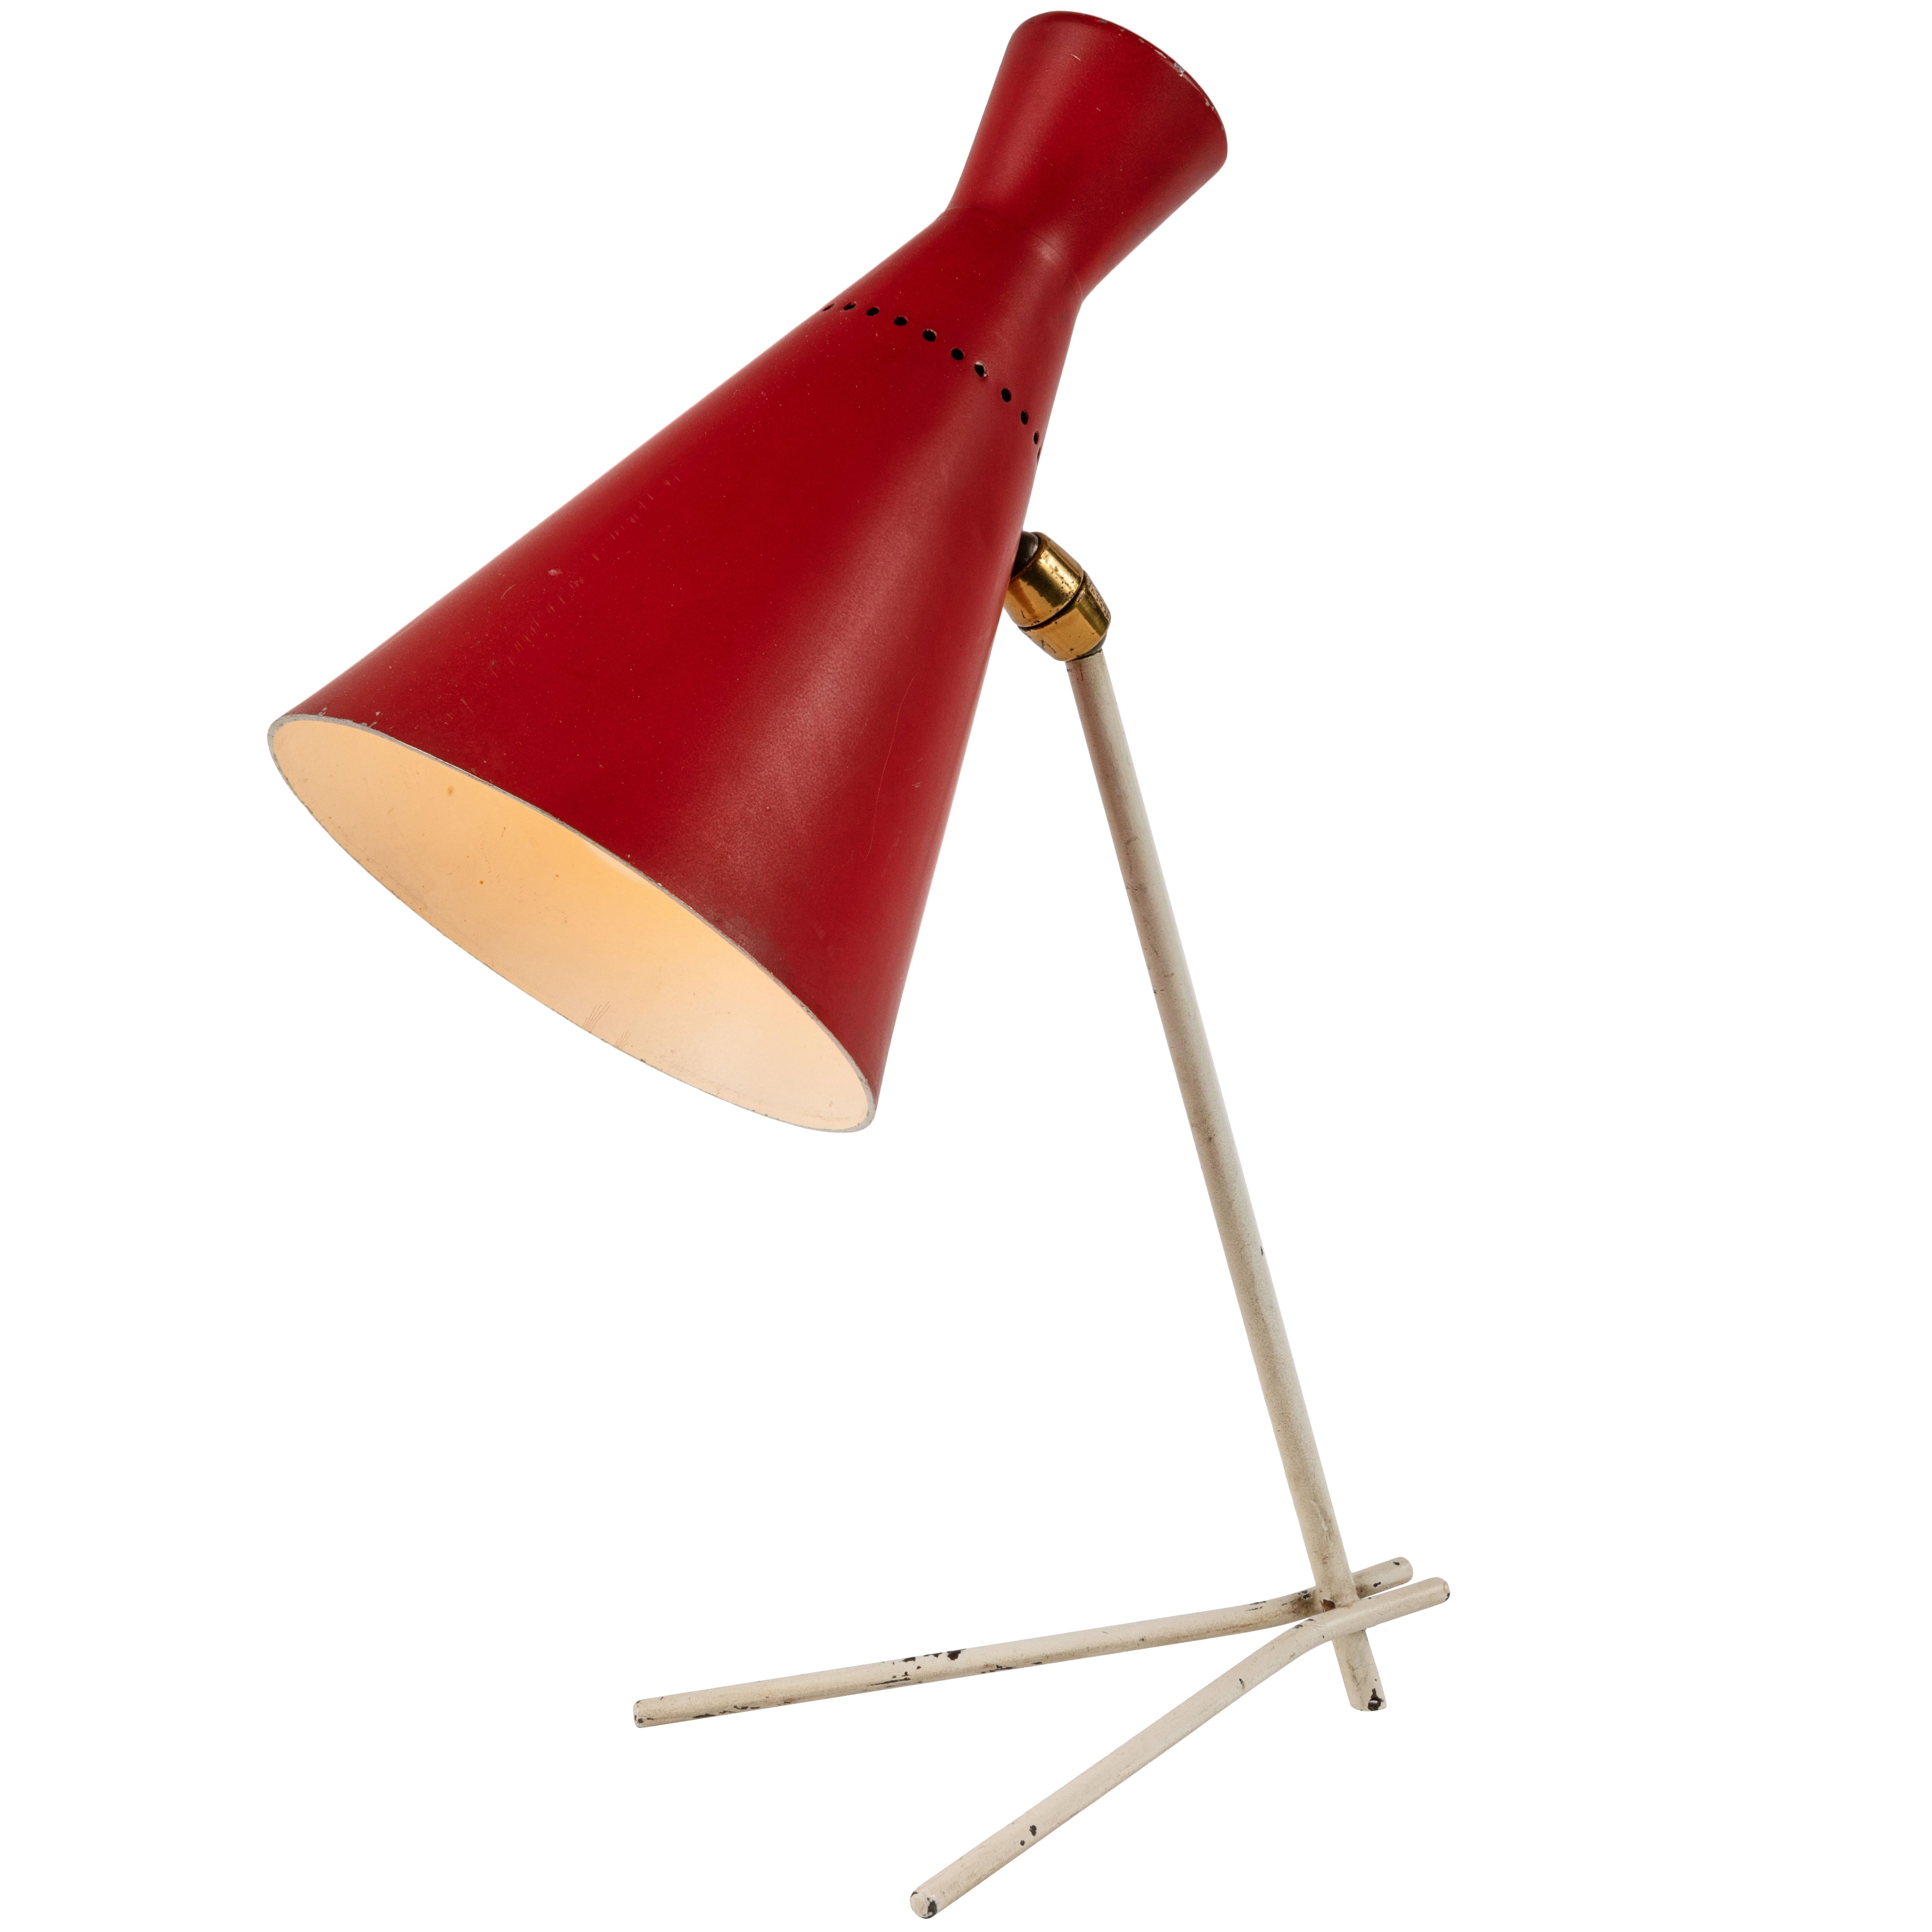 1950s Stilux Milano Red and White Table Lamp